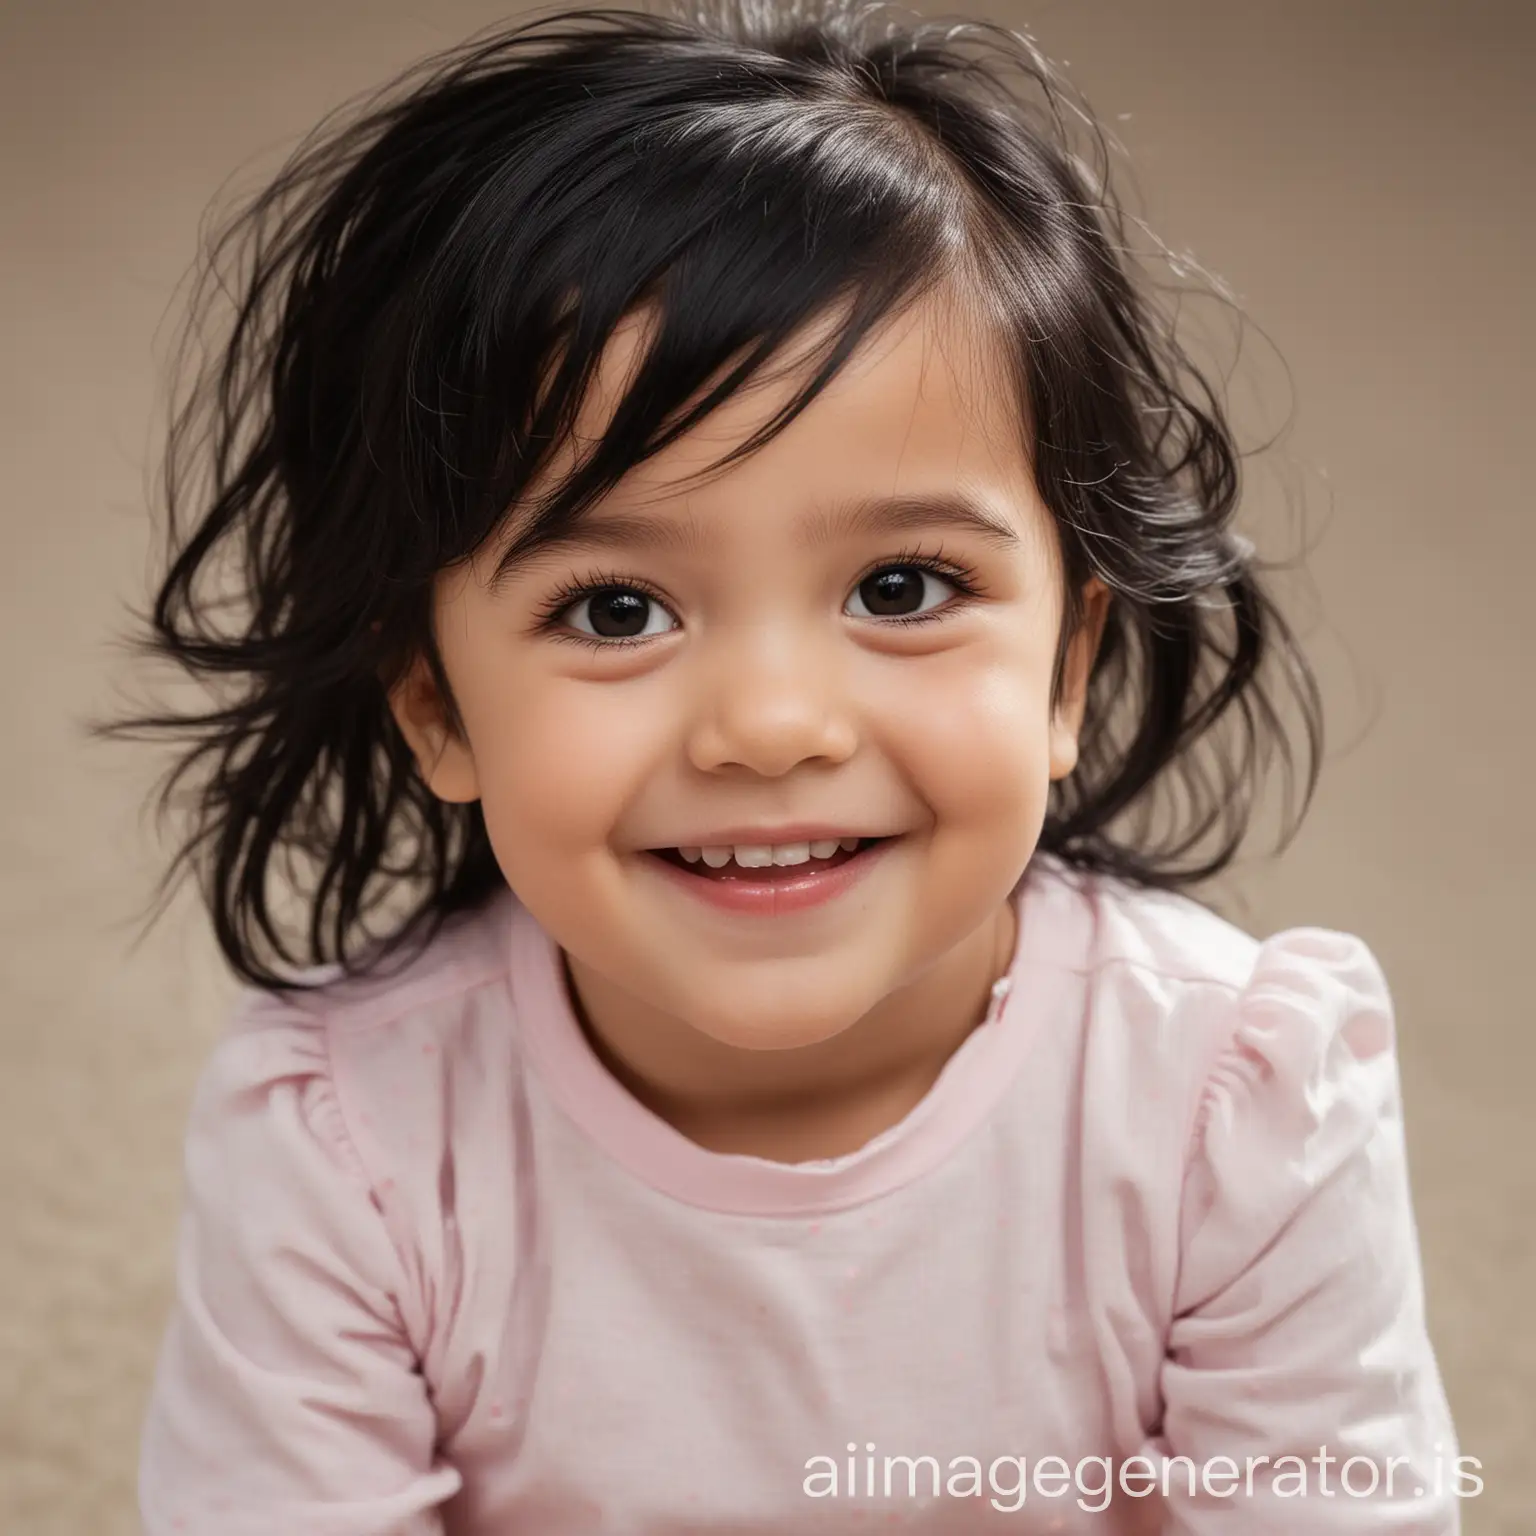 black haired 2 year old cute girl smiling portrait